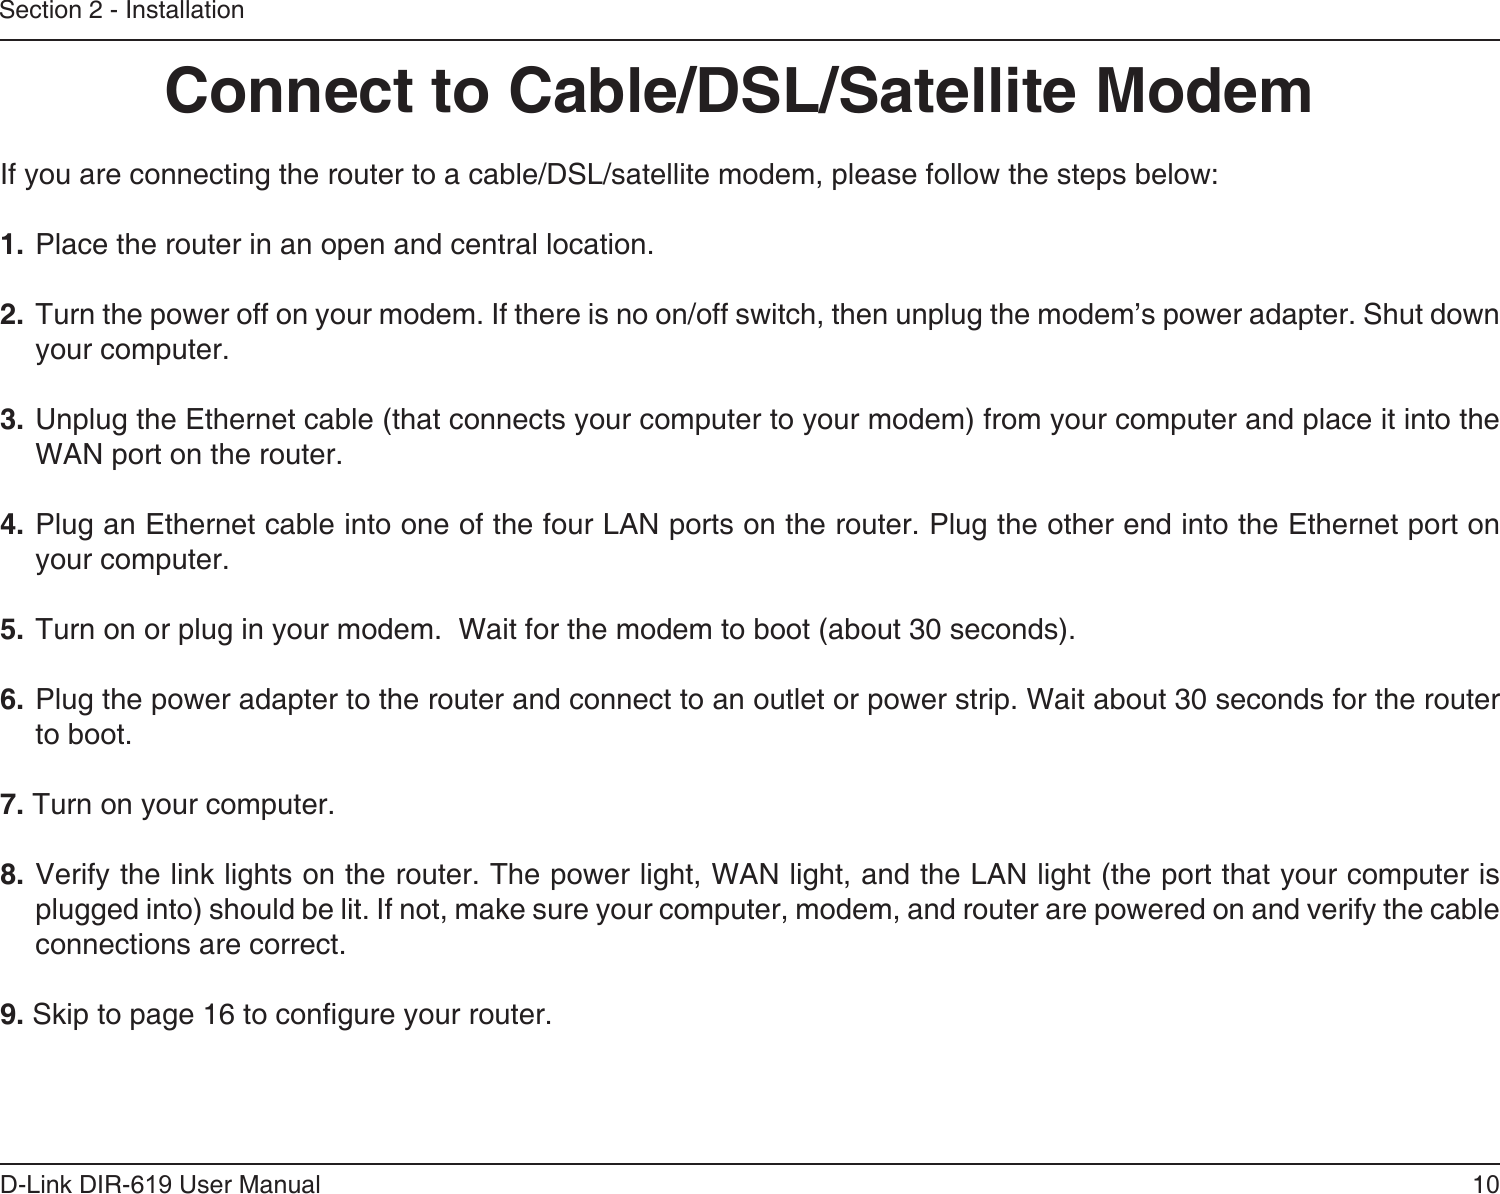 10D-Link DIR-619 User ManualSection 2 - InstallationIf you are connecting the router to a cable/DSL/satellite modem, please follow the steps below:1. Place the router in an open and central location. 2. Turn the power off on your modem. If there is no on/off switch, then unplug the modem’s power adapter. Shut down your computer.3. Unplug the Ethernet cable (that connects your computer to your modem) from your computer and place it into the WAN port on the router.  4. Plug an Ethernet cable into one of the four LAN ports on the router. Plug the other end into the Ethernet port on your computer.5. Turn on or plug in your modem.  Wait for the modem to boot (about 30 seconds). 6. Plug the power adapter to the router and connect to an outlet or power strip. Wait about 30 seconds for the router to boot. 7. Turn on your computer. 8. Verify the link lights on the router. The power light, WAN light, and the LAN light (the port that your computer is plugged into) should be lit. If not, make sure your computer, modem, and router are powered on and verify the cable connections are correct. 9. Skip to page 16 to congure your router. Connect to Cable/DSL/Satellite Modem